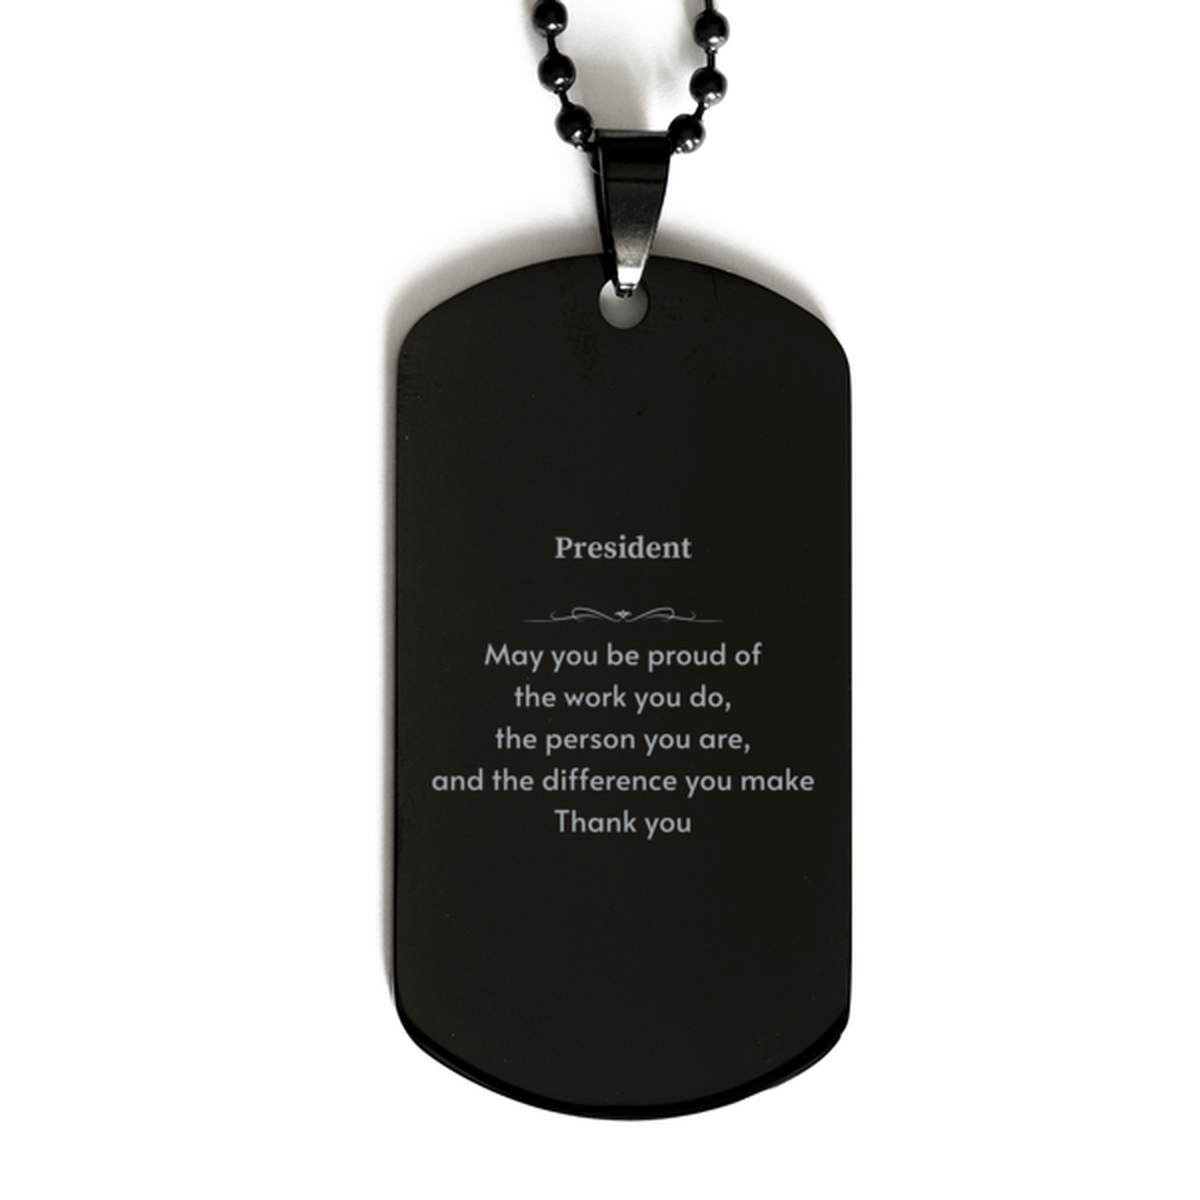 Heartwarming Black Dog Tag Retirement Coworkers Gifts for President, President May You be proud of the work you do, the person you are Gifts for Boss Men Women Friends